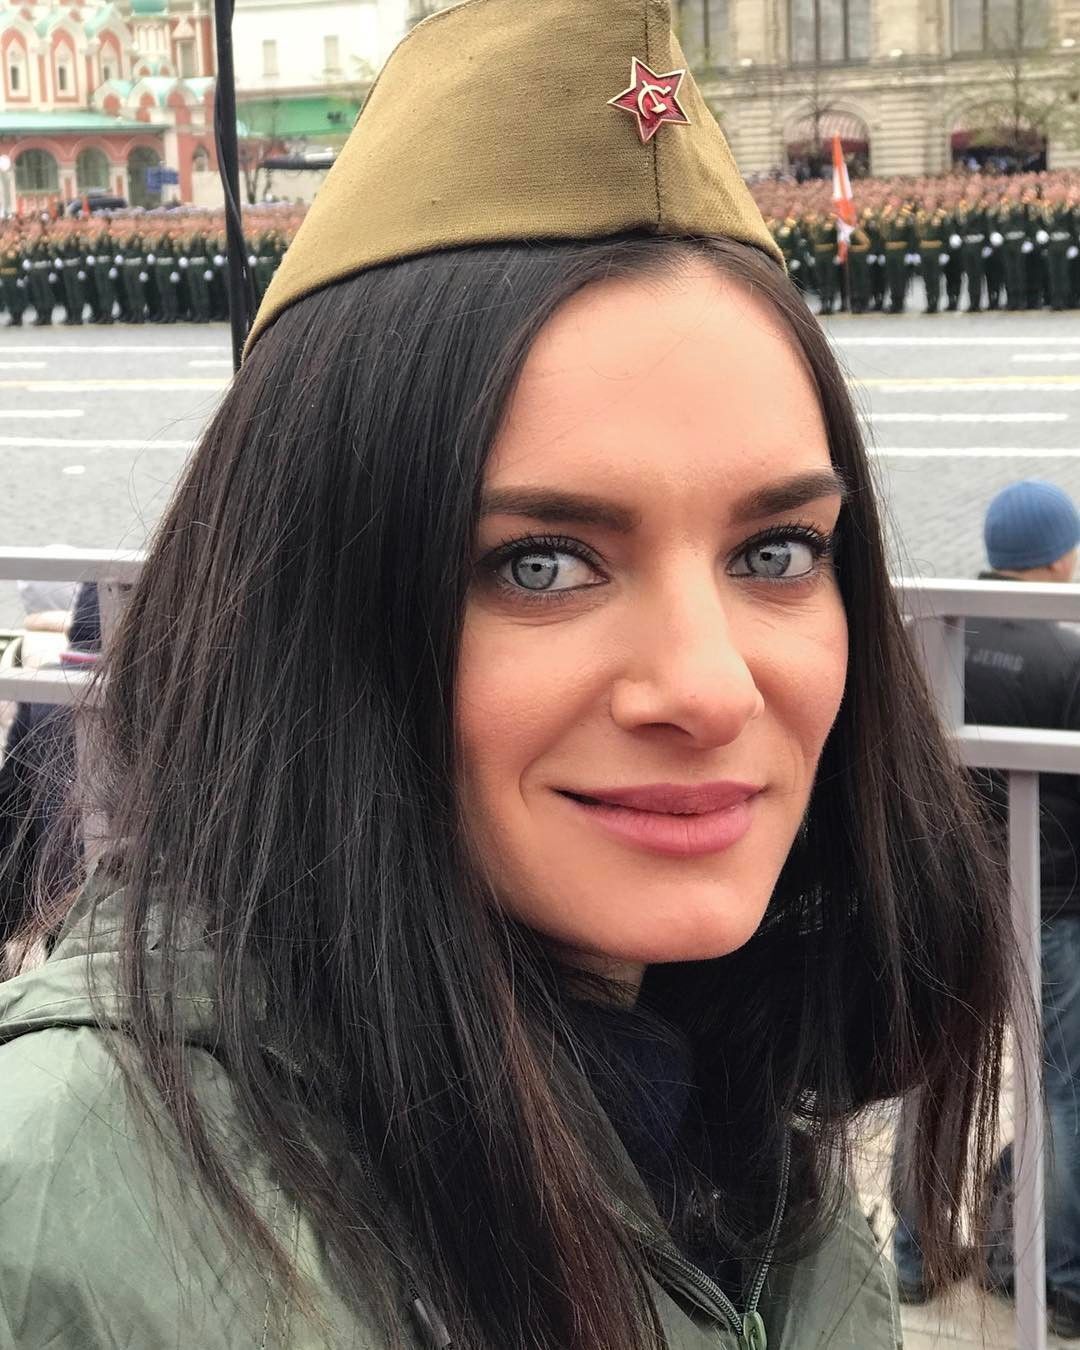 Olympic champion Isinbayeva, who fled to Spain, disavows Russian army and Putin, calling Russians losers